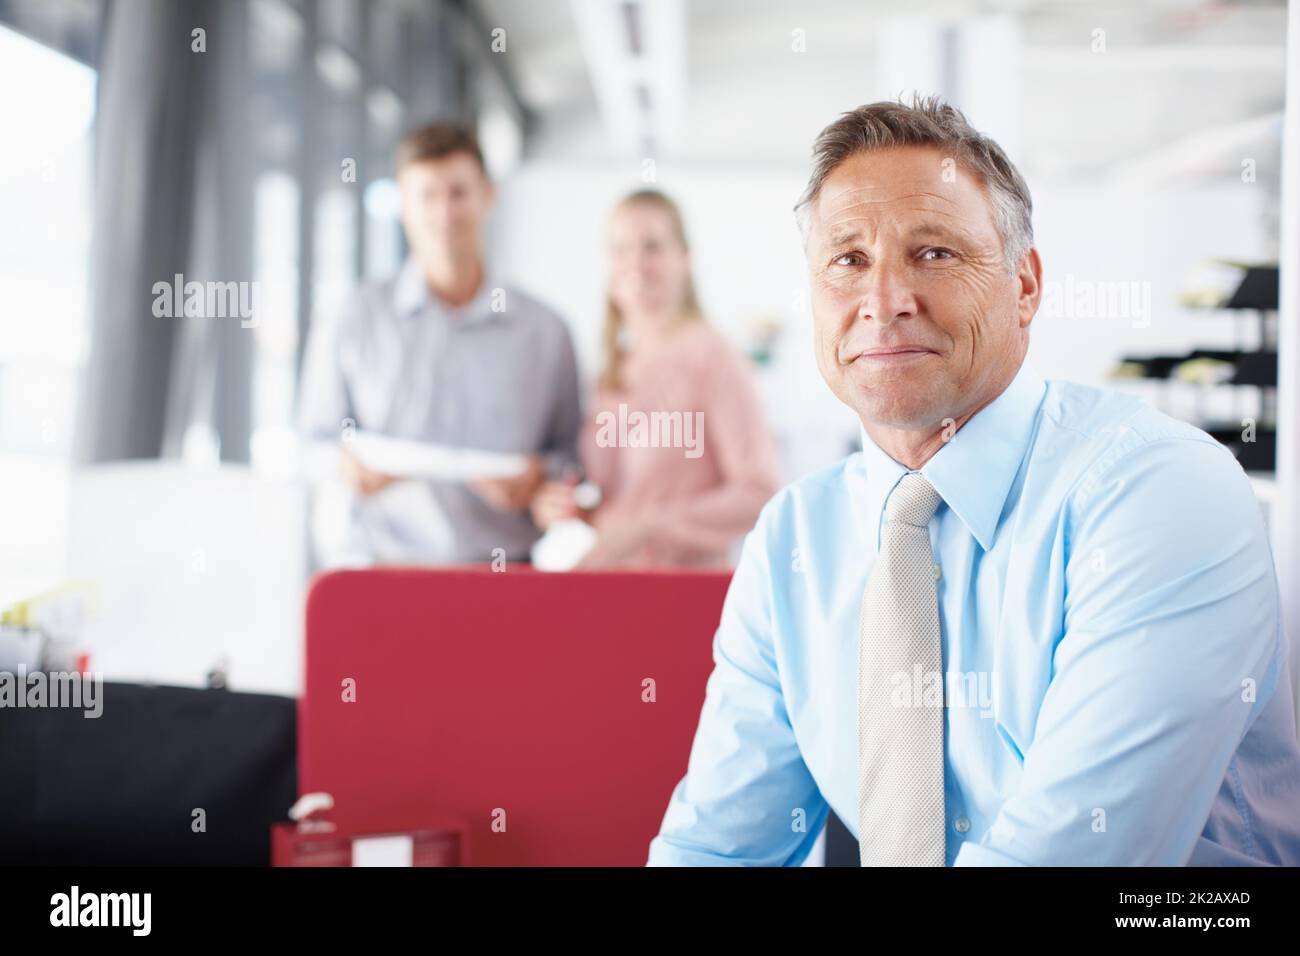 He relishes the challenges business throws at him. Portrait of a senior business manager smiling while his colleagues work in the background. Stock Photo